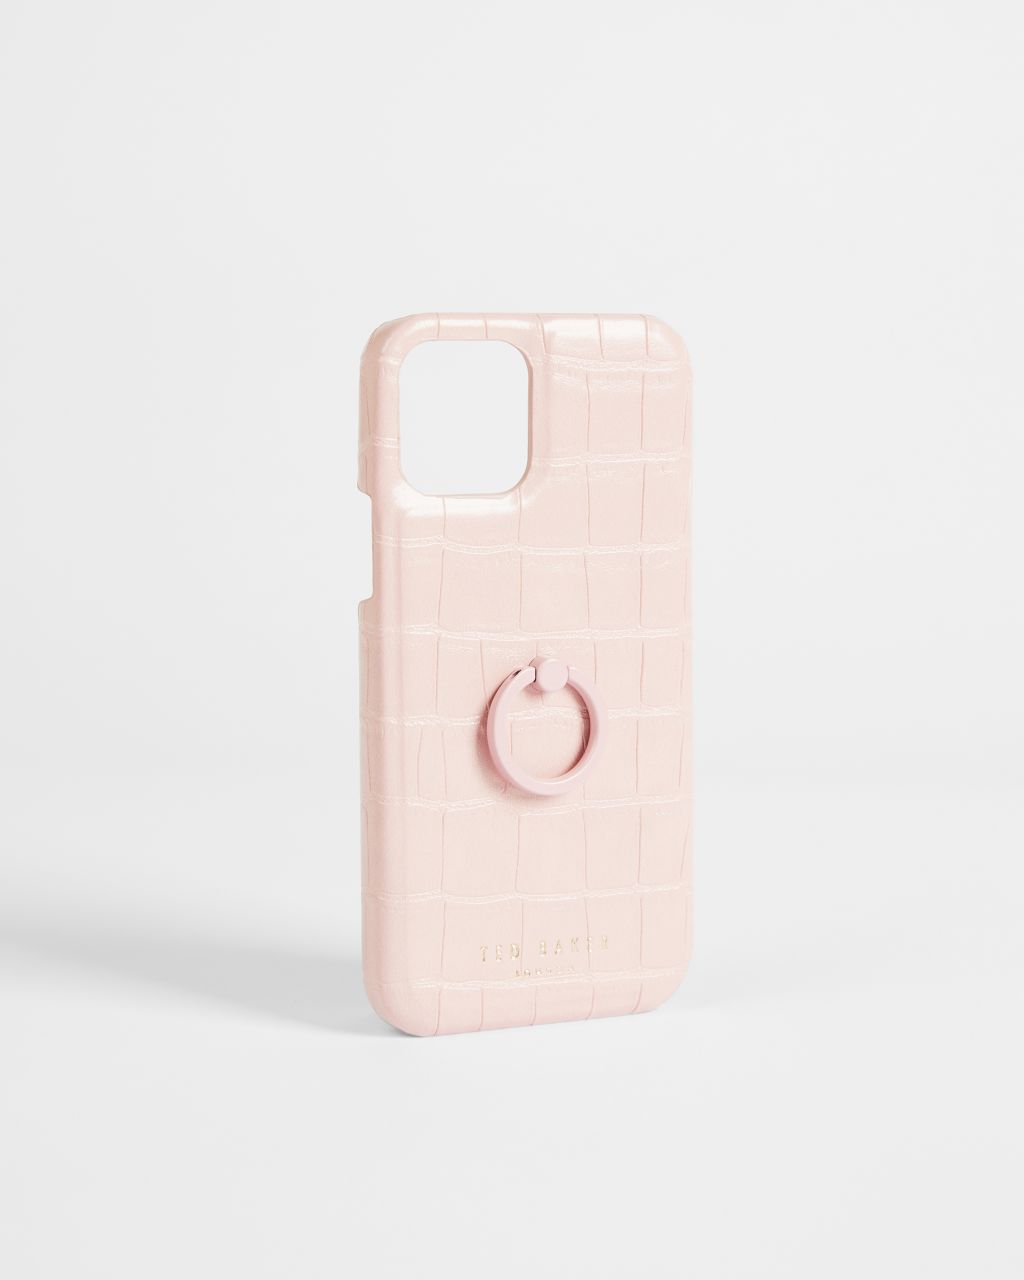 Ted Baker Women's Imitation Croc Iphone 12 / 12 Pro Clip Case in Pale Pink, Cattie